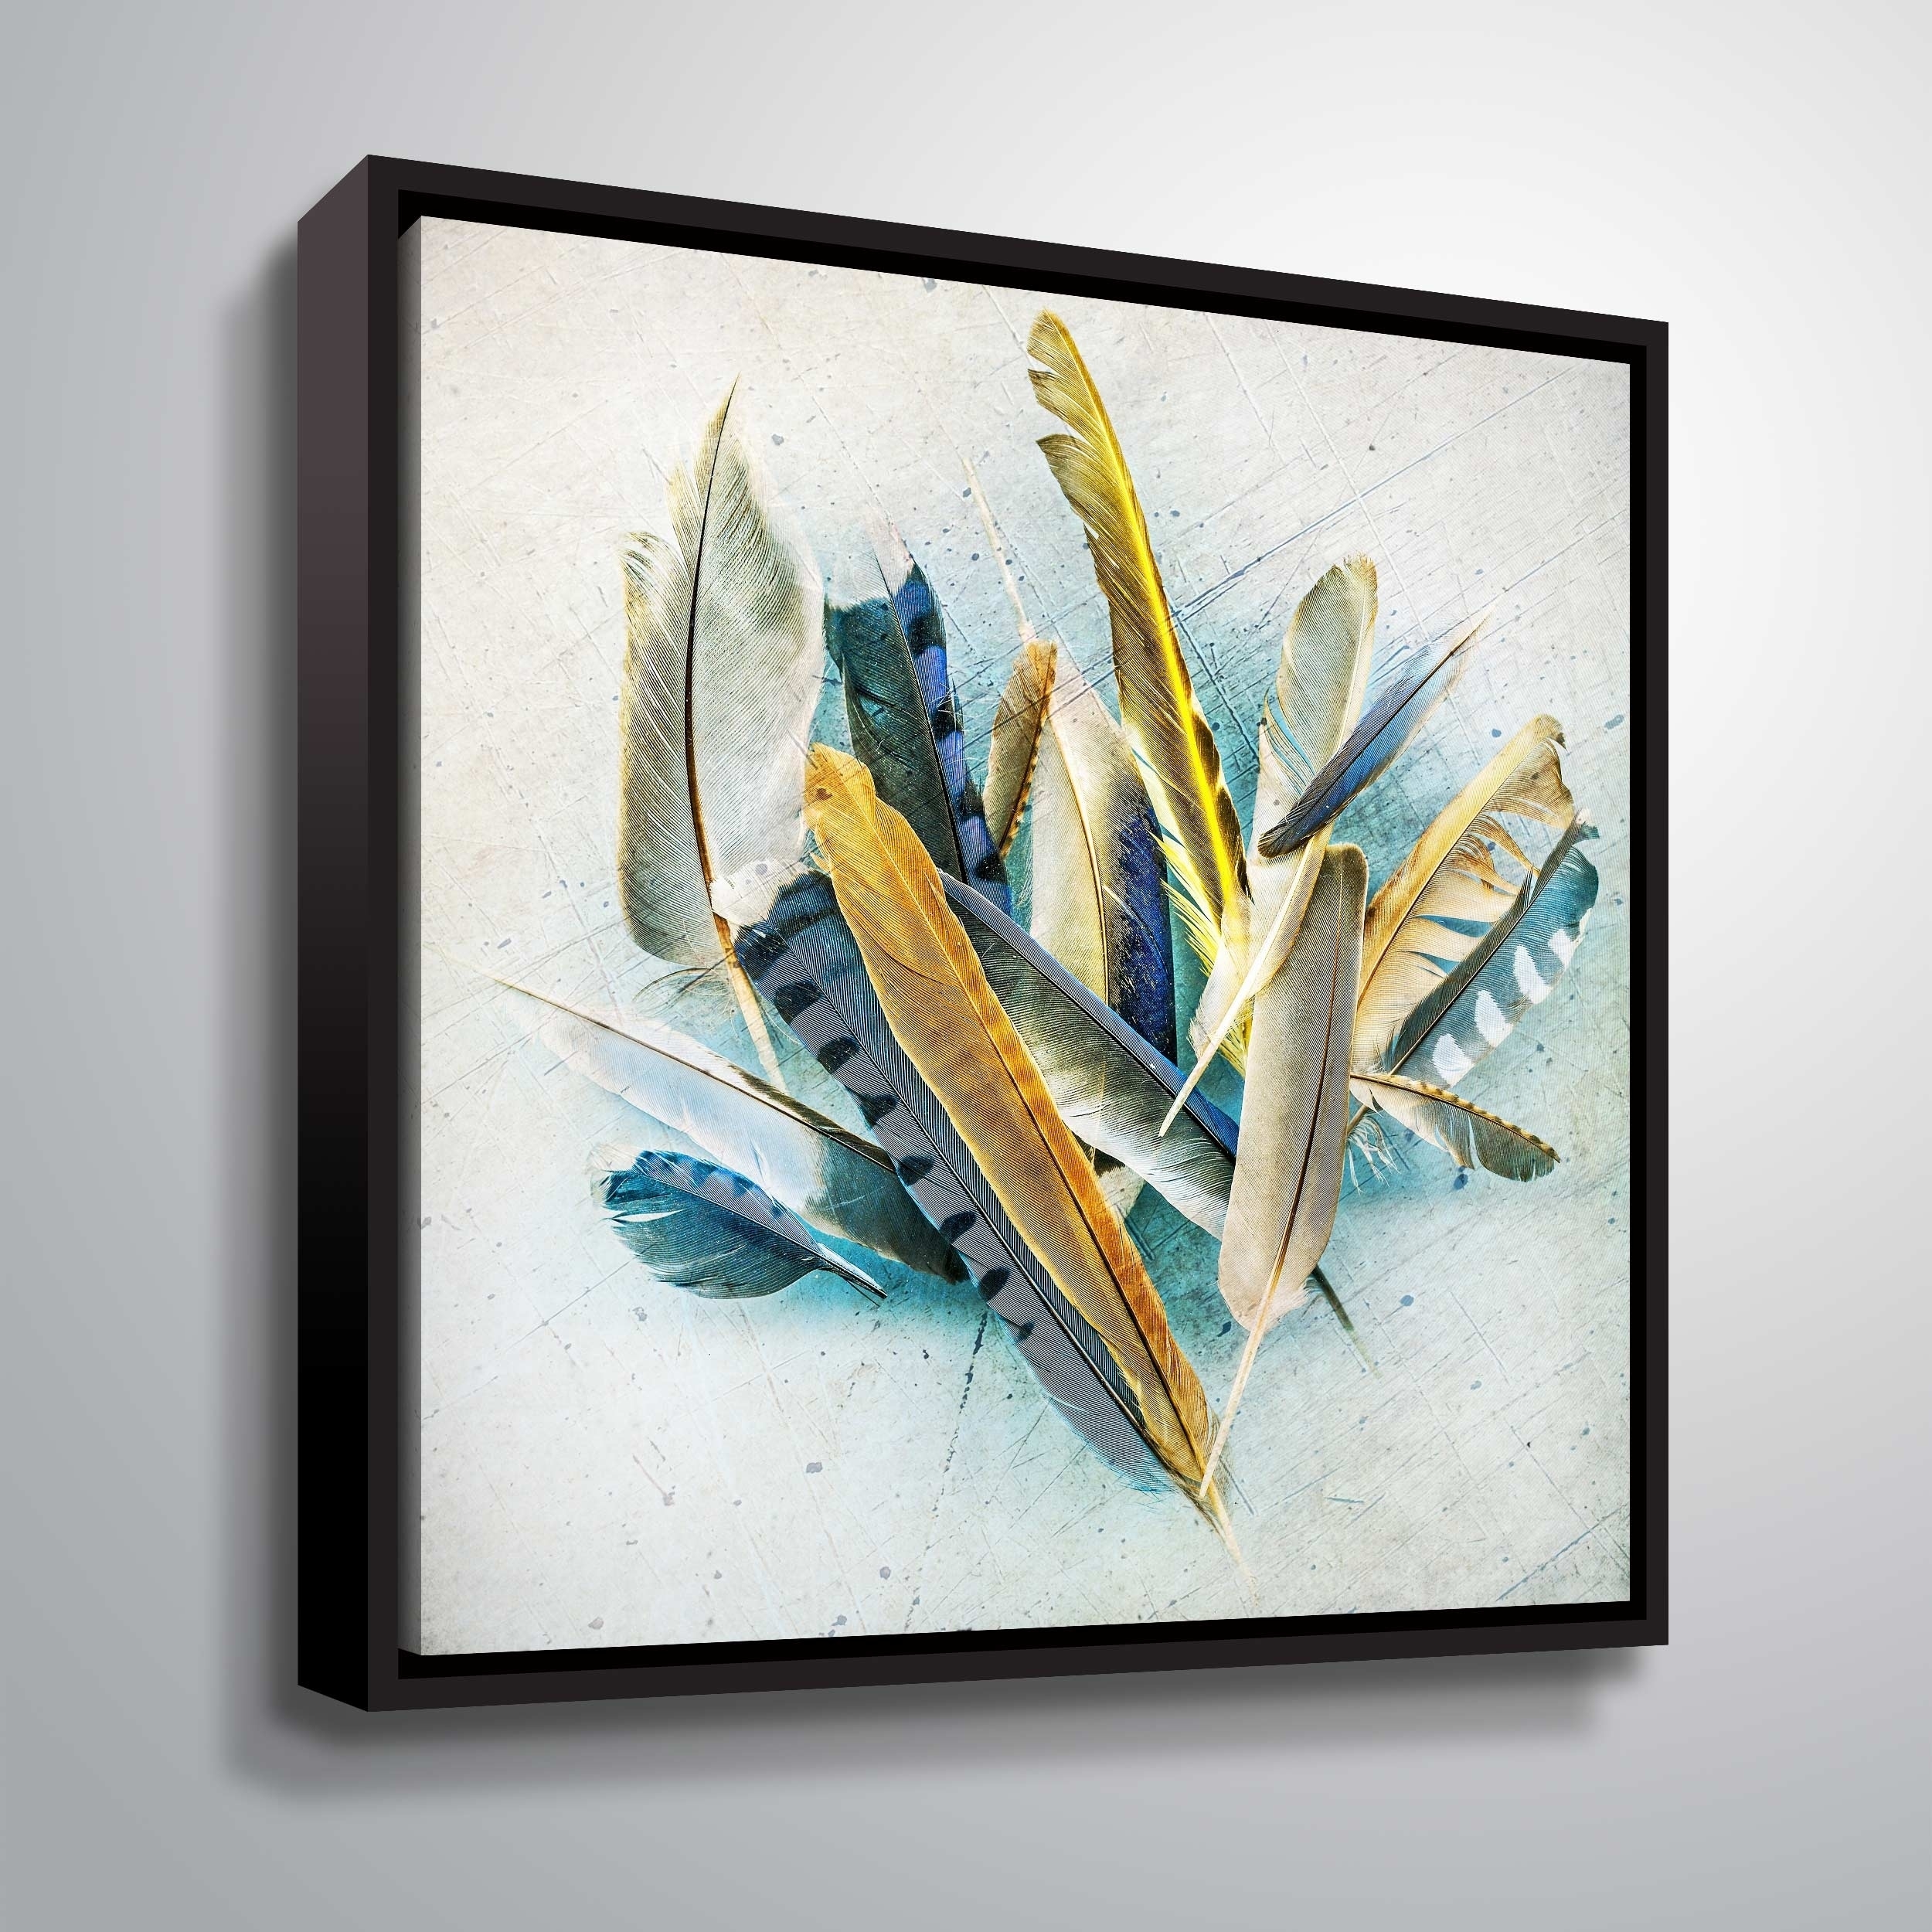 ArtWall Feather Study No. 3 Gallery Wrapped Floater-framed Canvas